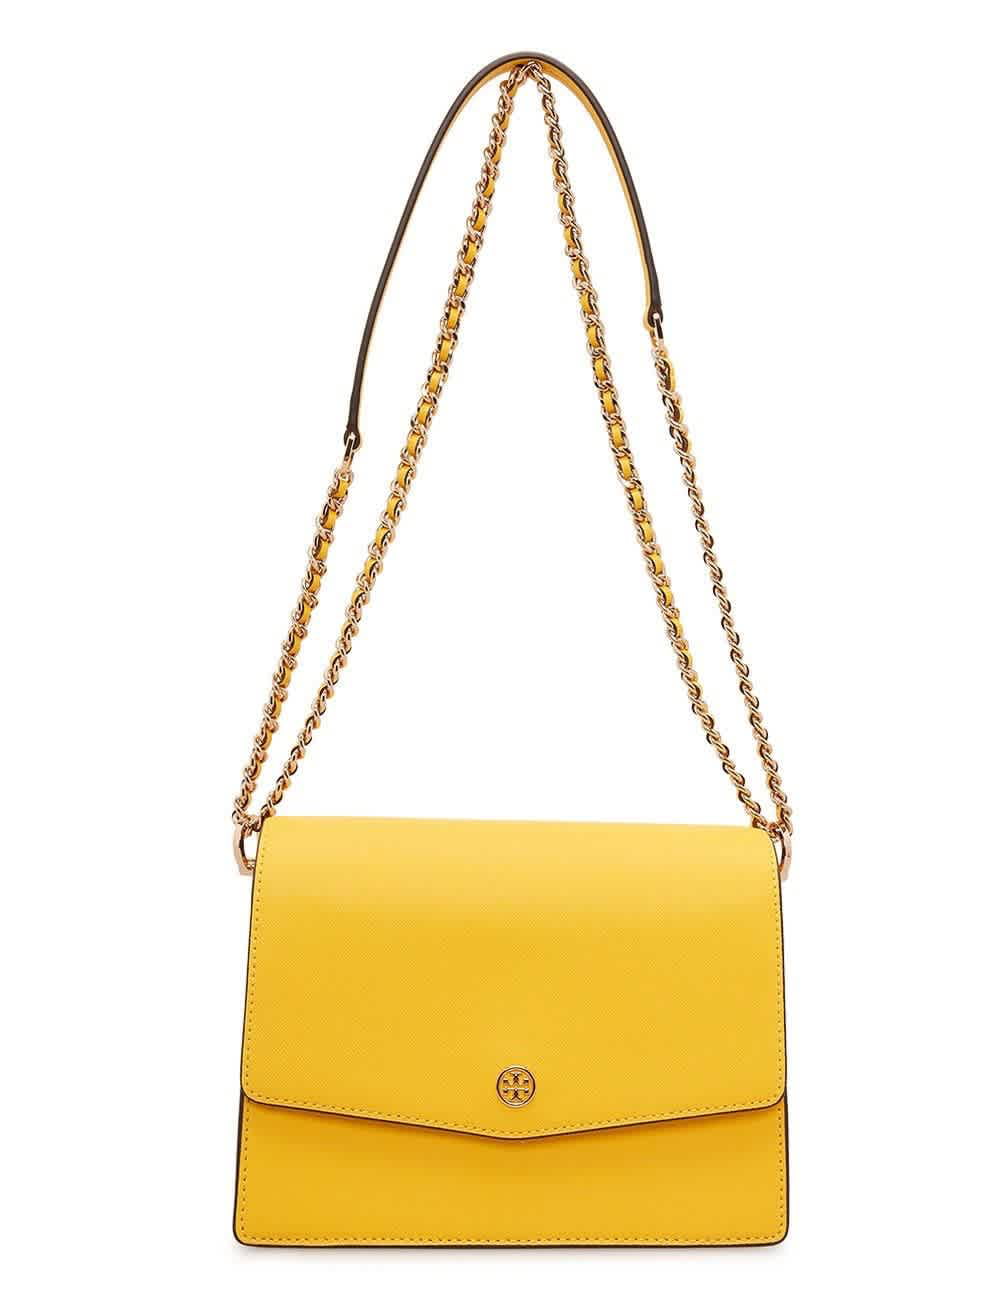 Tory Burch Ladies Robinson Floral Interior Convertible Shoulder Bag in  Yellow 